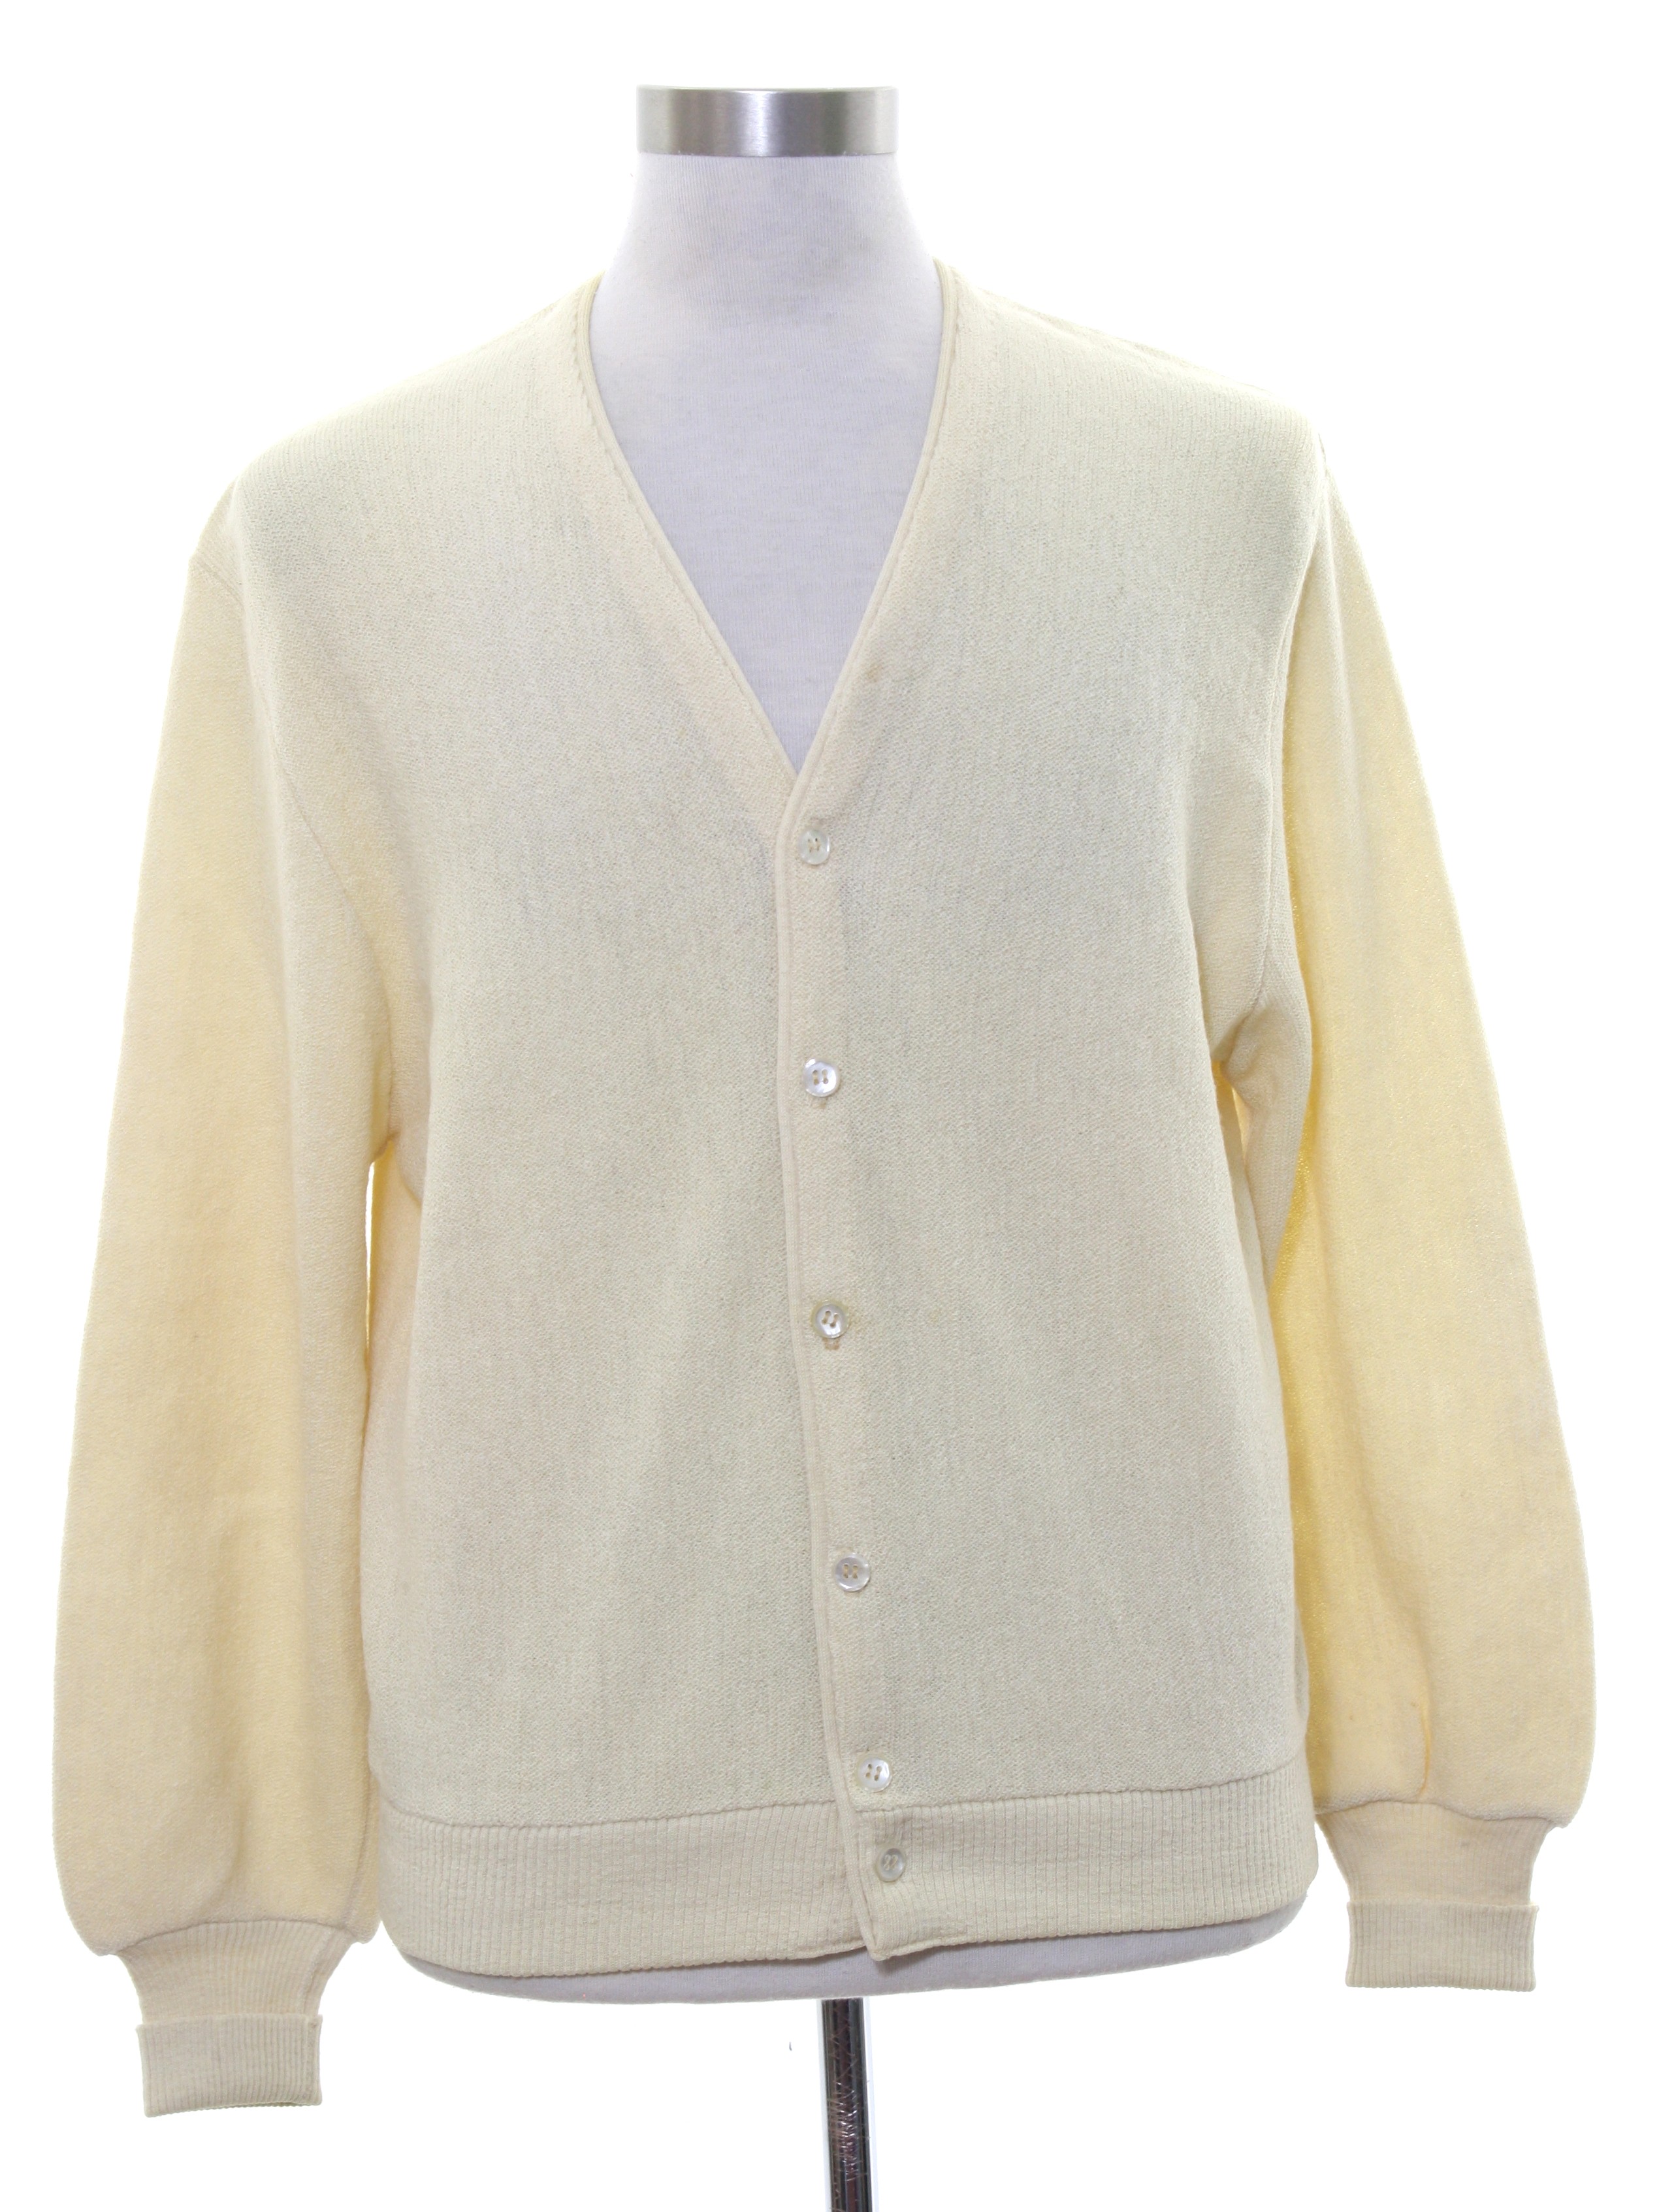 60s Caridgan Sweater (Arnold Palmer): 60s style (made in late 70s or ...